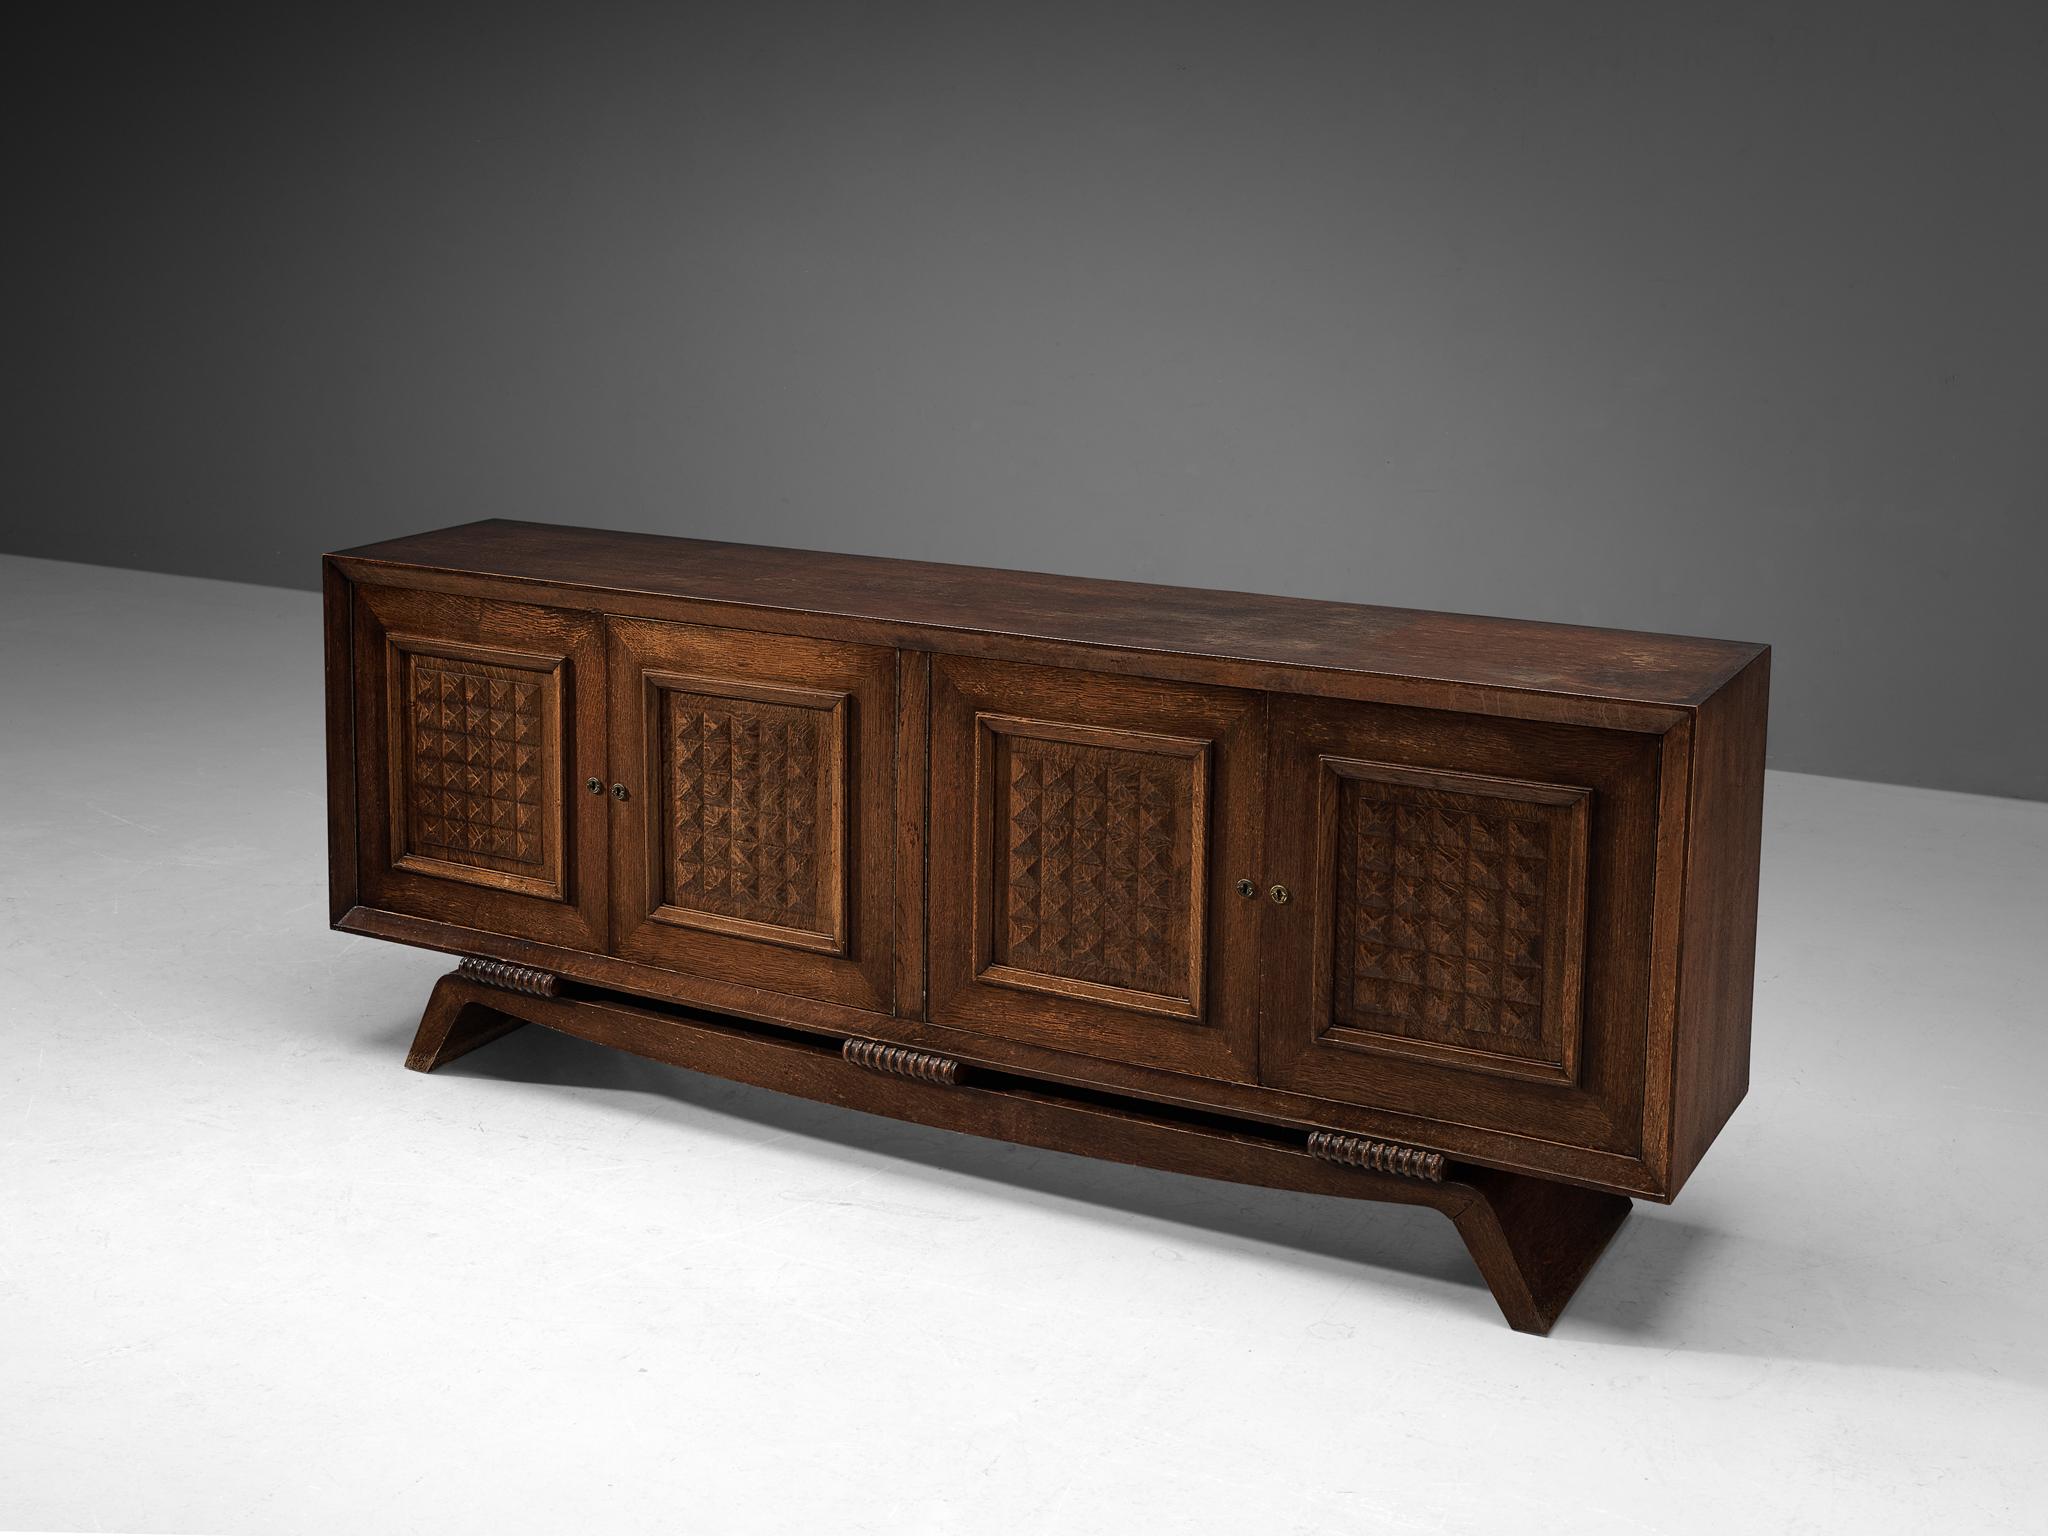 Sideboard, oak, Italy, 1940s

This Italian sideboard is made in the late 1940s. It has a lot of very distinct and modern detailing, like the beautifully shaped base of this sideboard with downward curved edges and the vertical rings in between.